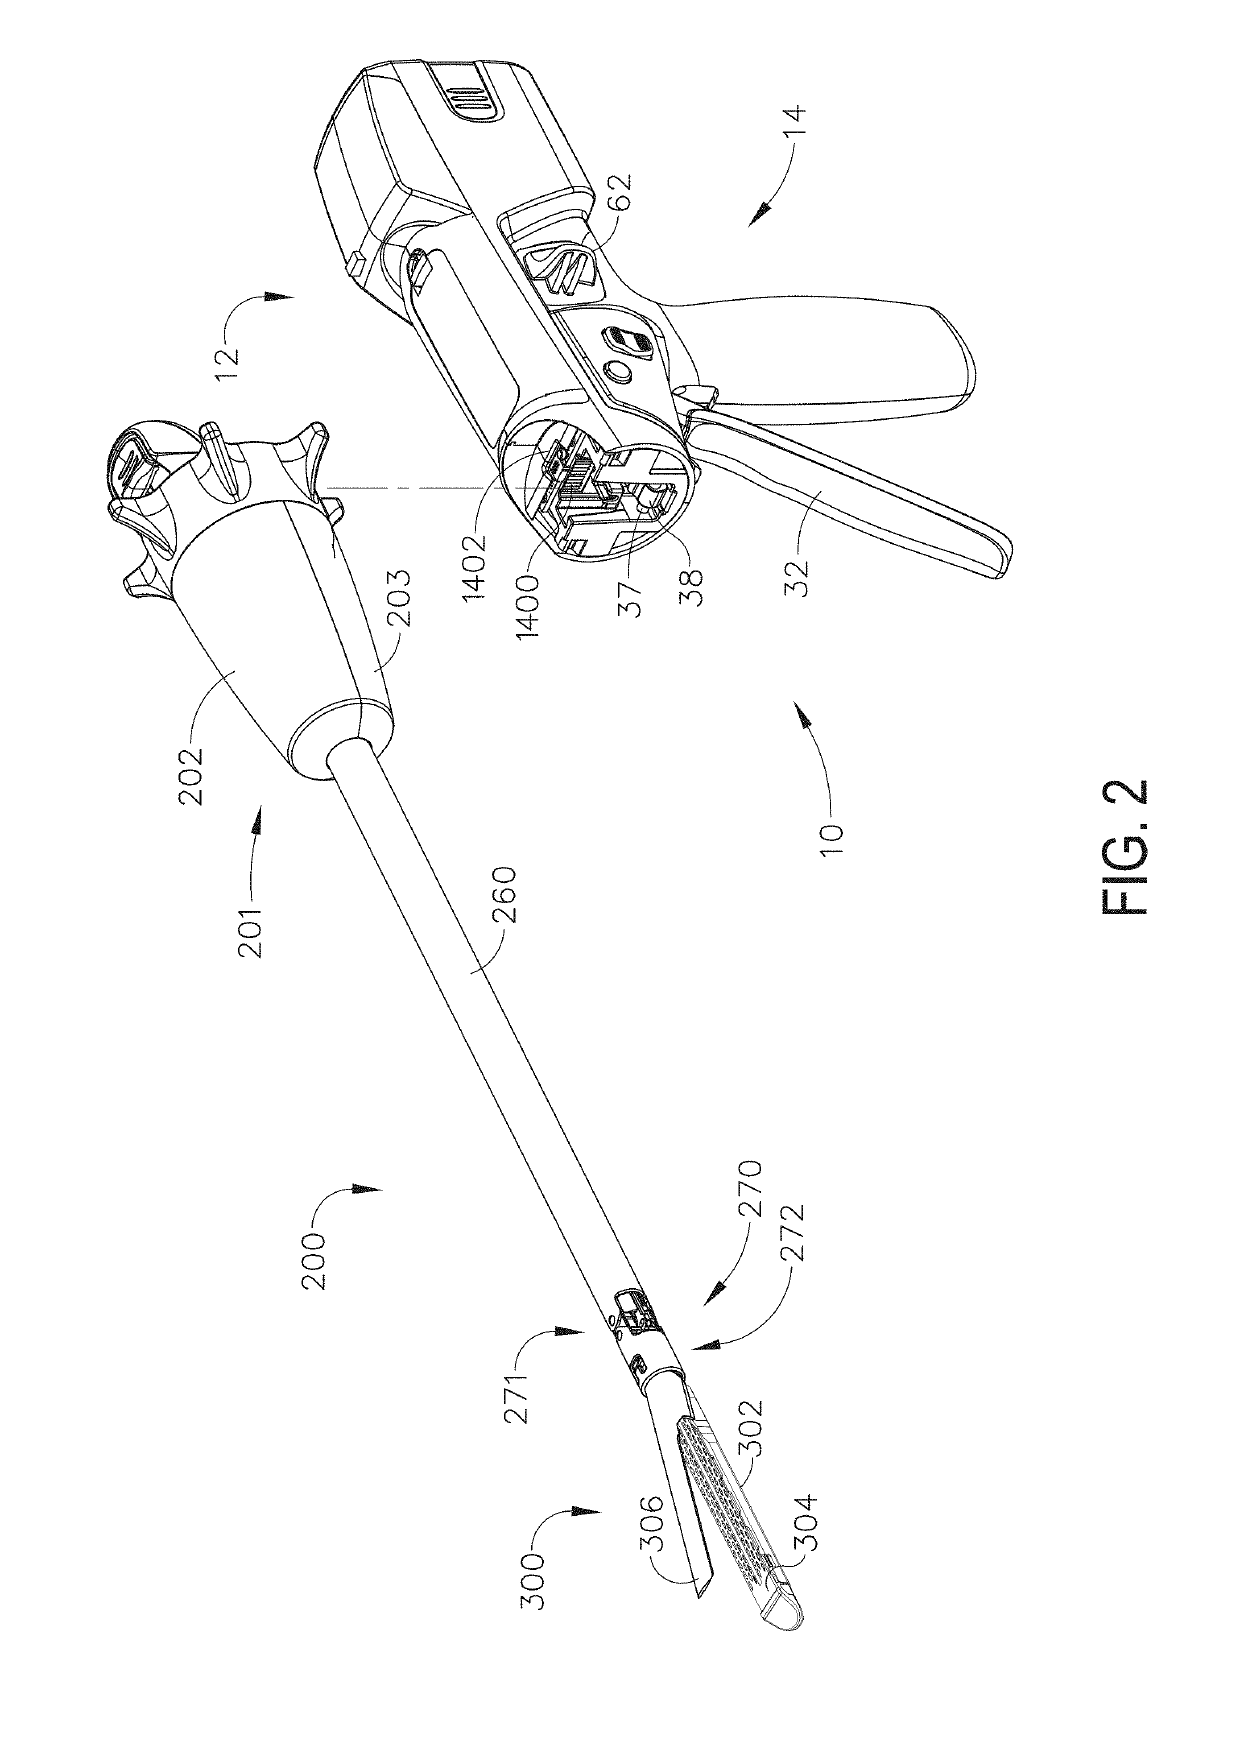 Surgical instrument with detection sensors